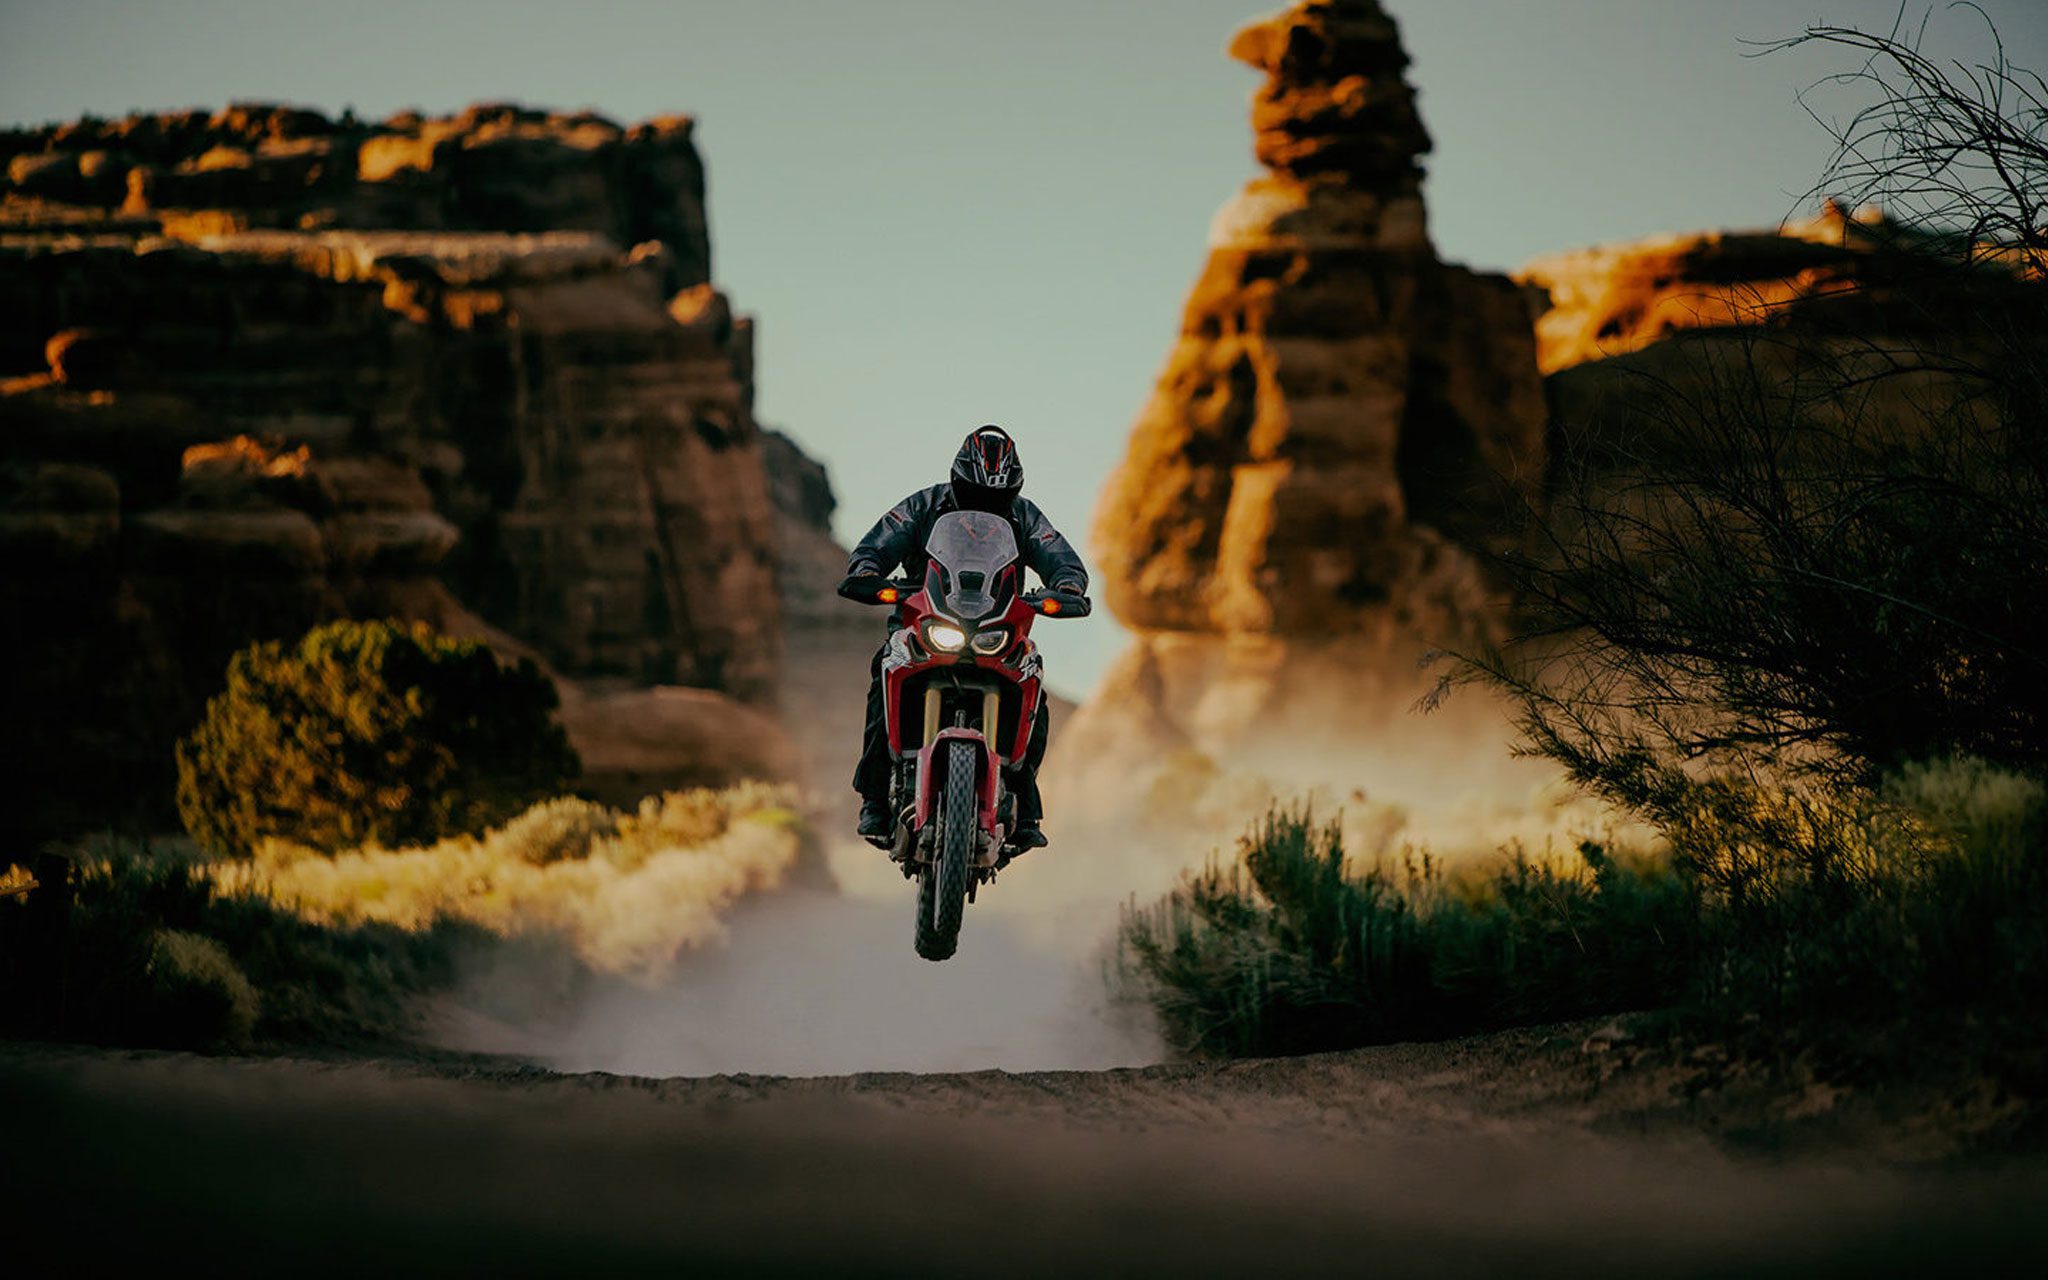 Dual sport rider in the desert catching air